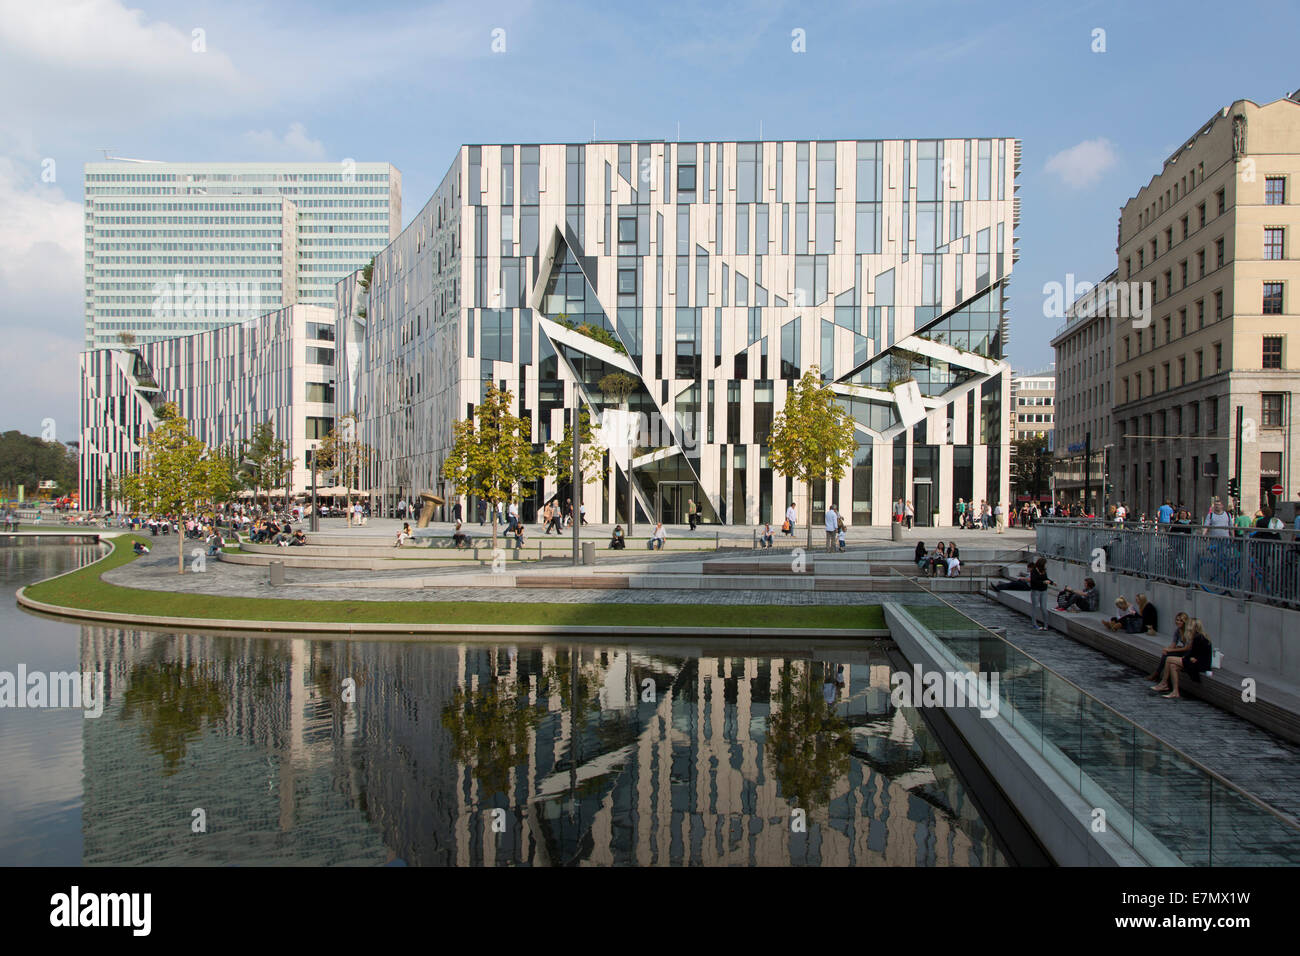 Modern Kö-Bogen shopping centre on Koenigsallee in Dusseldorf, Germany designed by Daniel Libeskind and constructed in 2013. Stock Photo